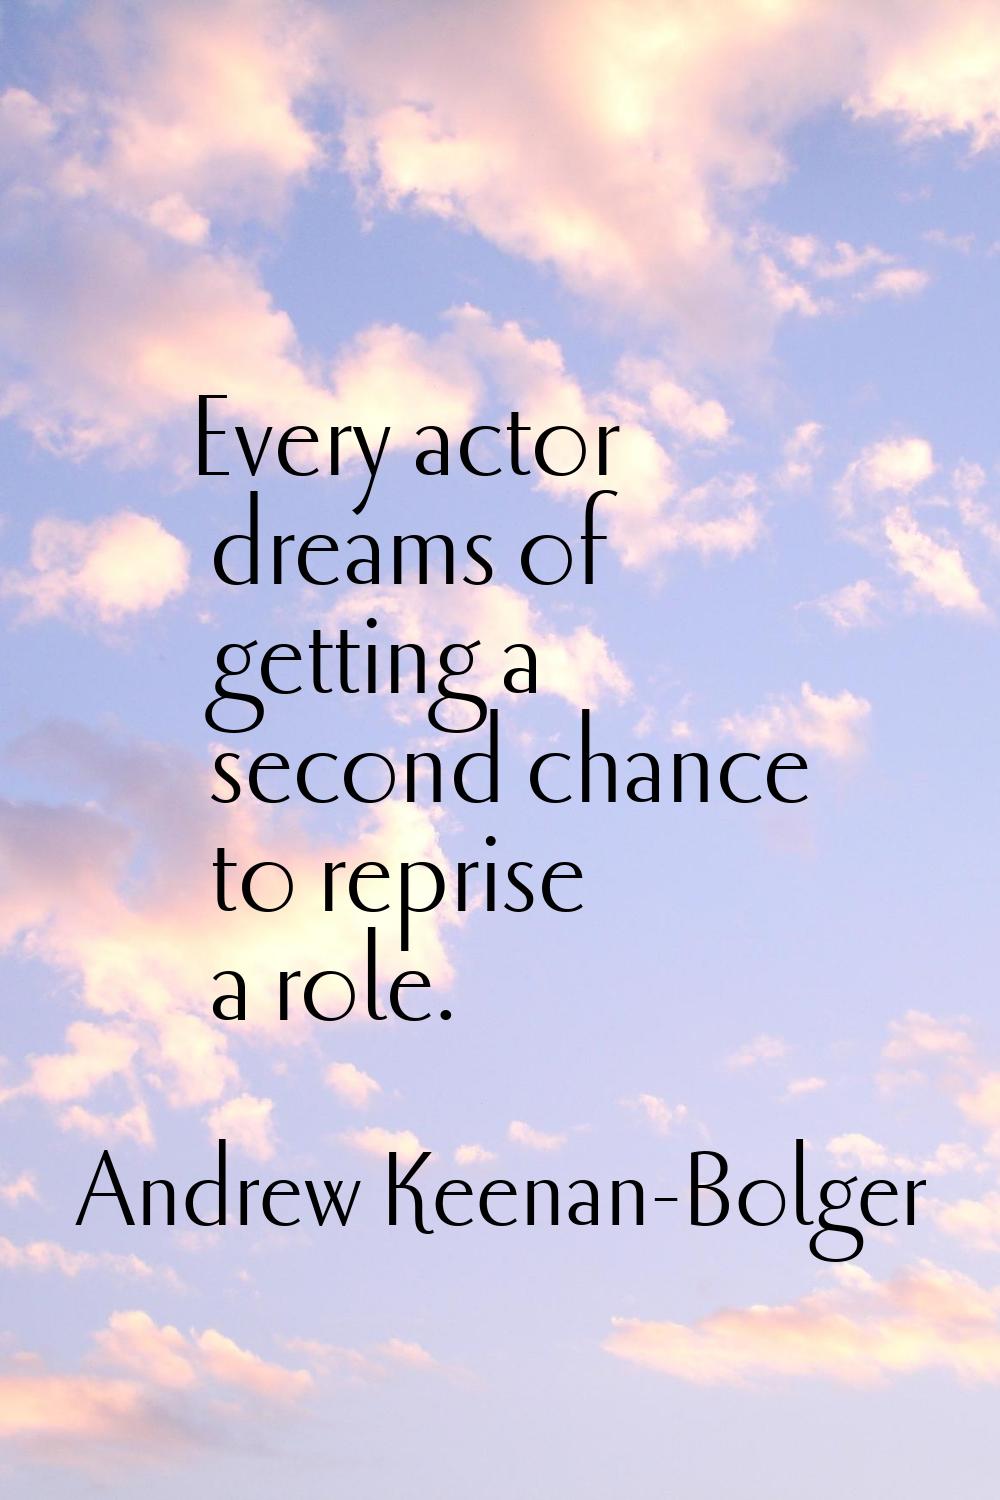 Every actor dreams of getting a second chance to reprise a role.